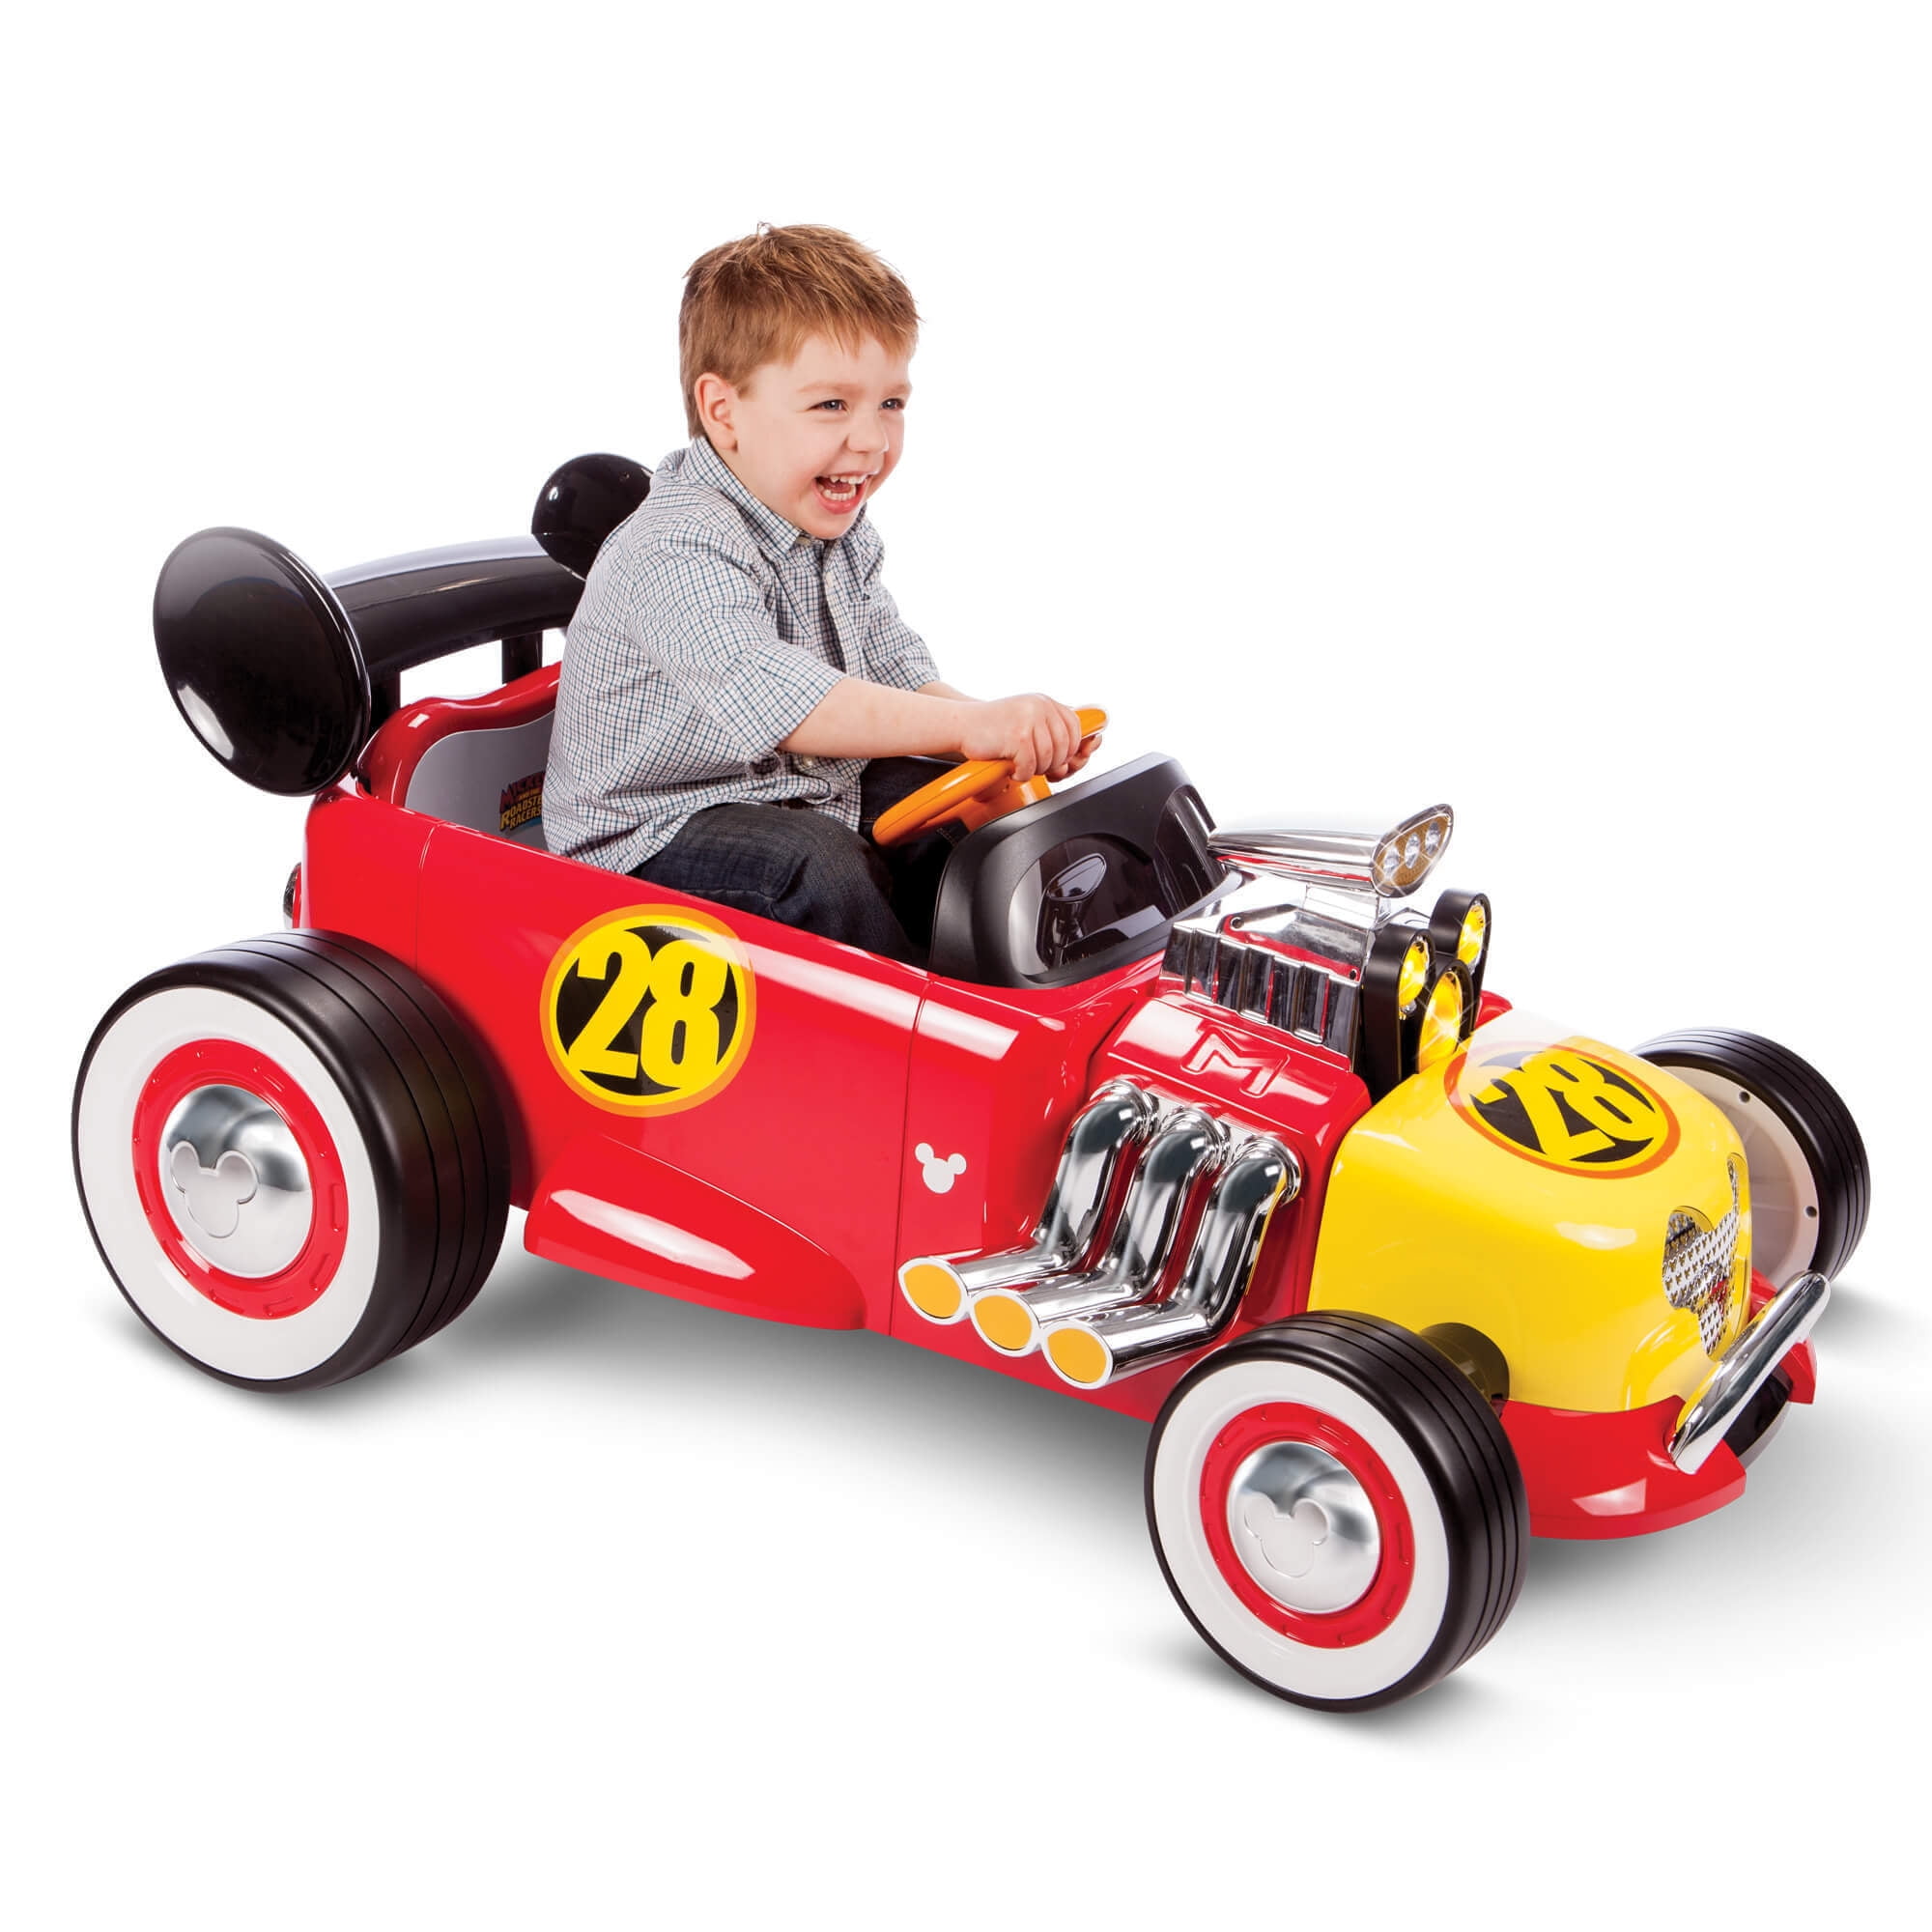 Disney Mickey Boys’ 6V Battery-Powered Ride-On Toy Quad Outdoor Toddlers Battery 